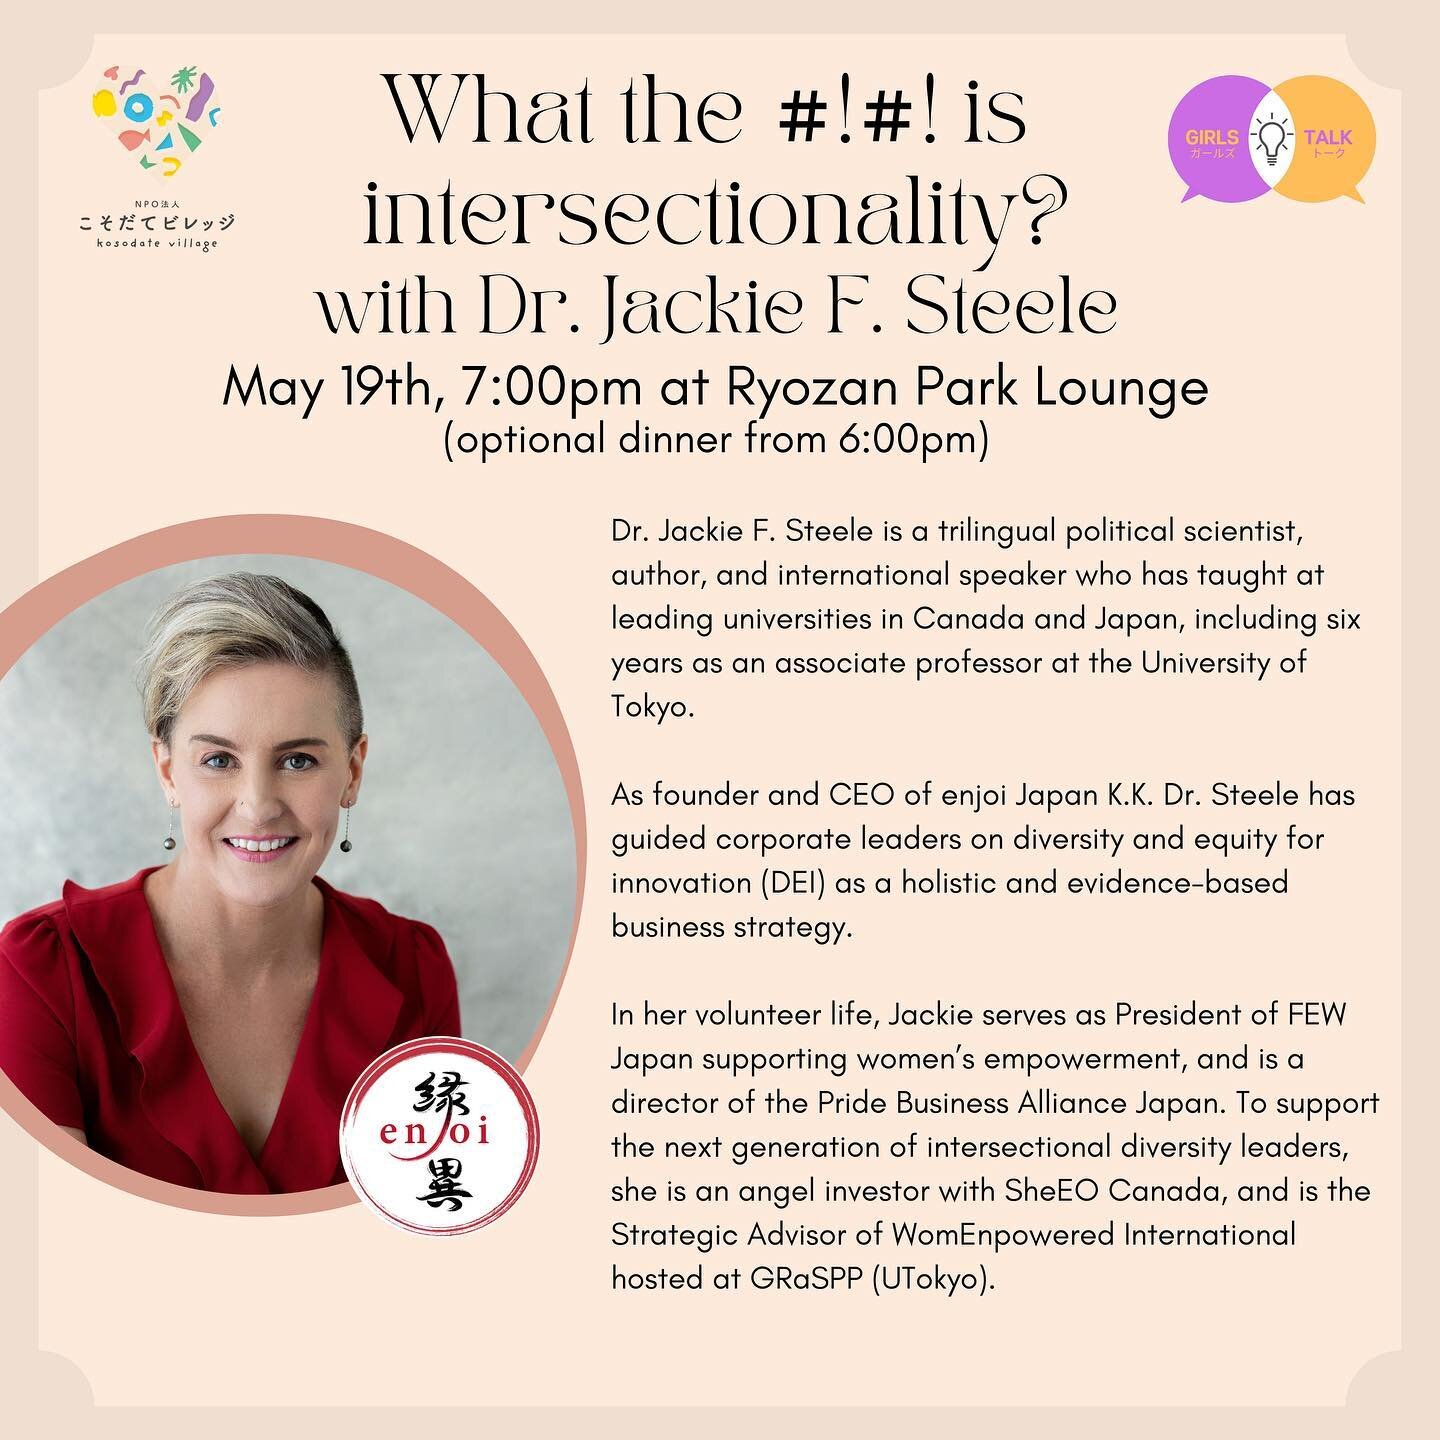 Our next meeting will be Friday, May 19th with Dr. Jackie F. Steele! Dr. Steele will be presenting &ldquo;What the #!#! is intersectionality?&rdquo; See you all there at 7:00pm! (Optional dinner from 6:00pm!)